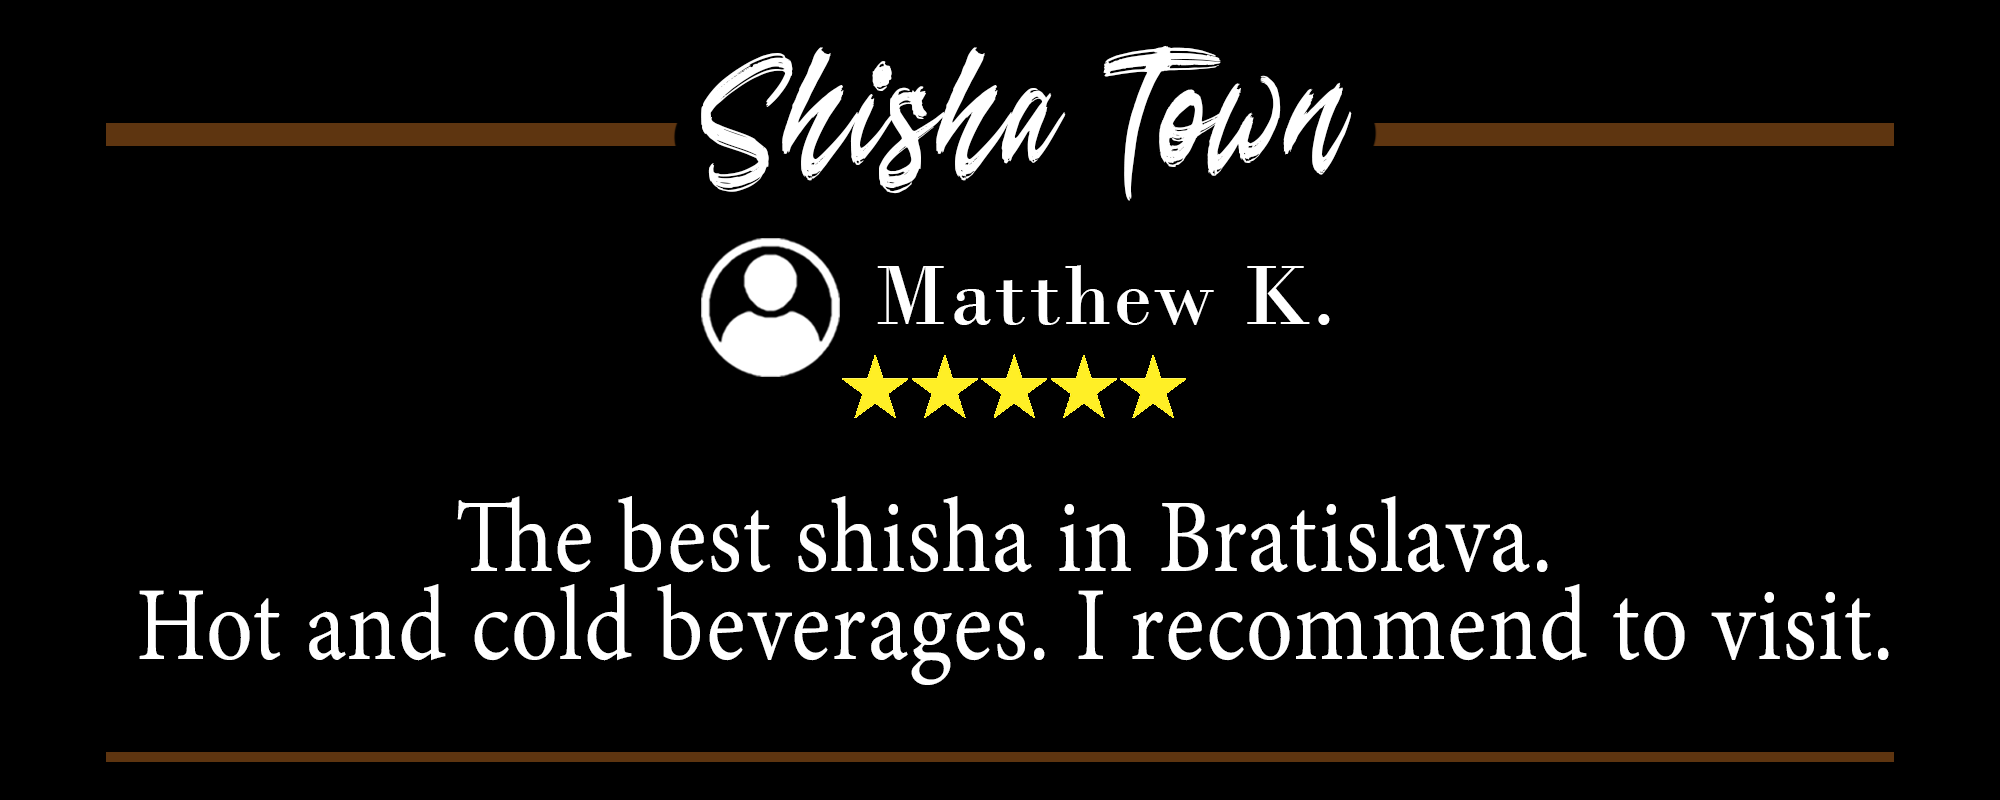 Best shisha in Bratislava, hot and cold beverages, I recommend to visit